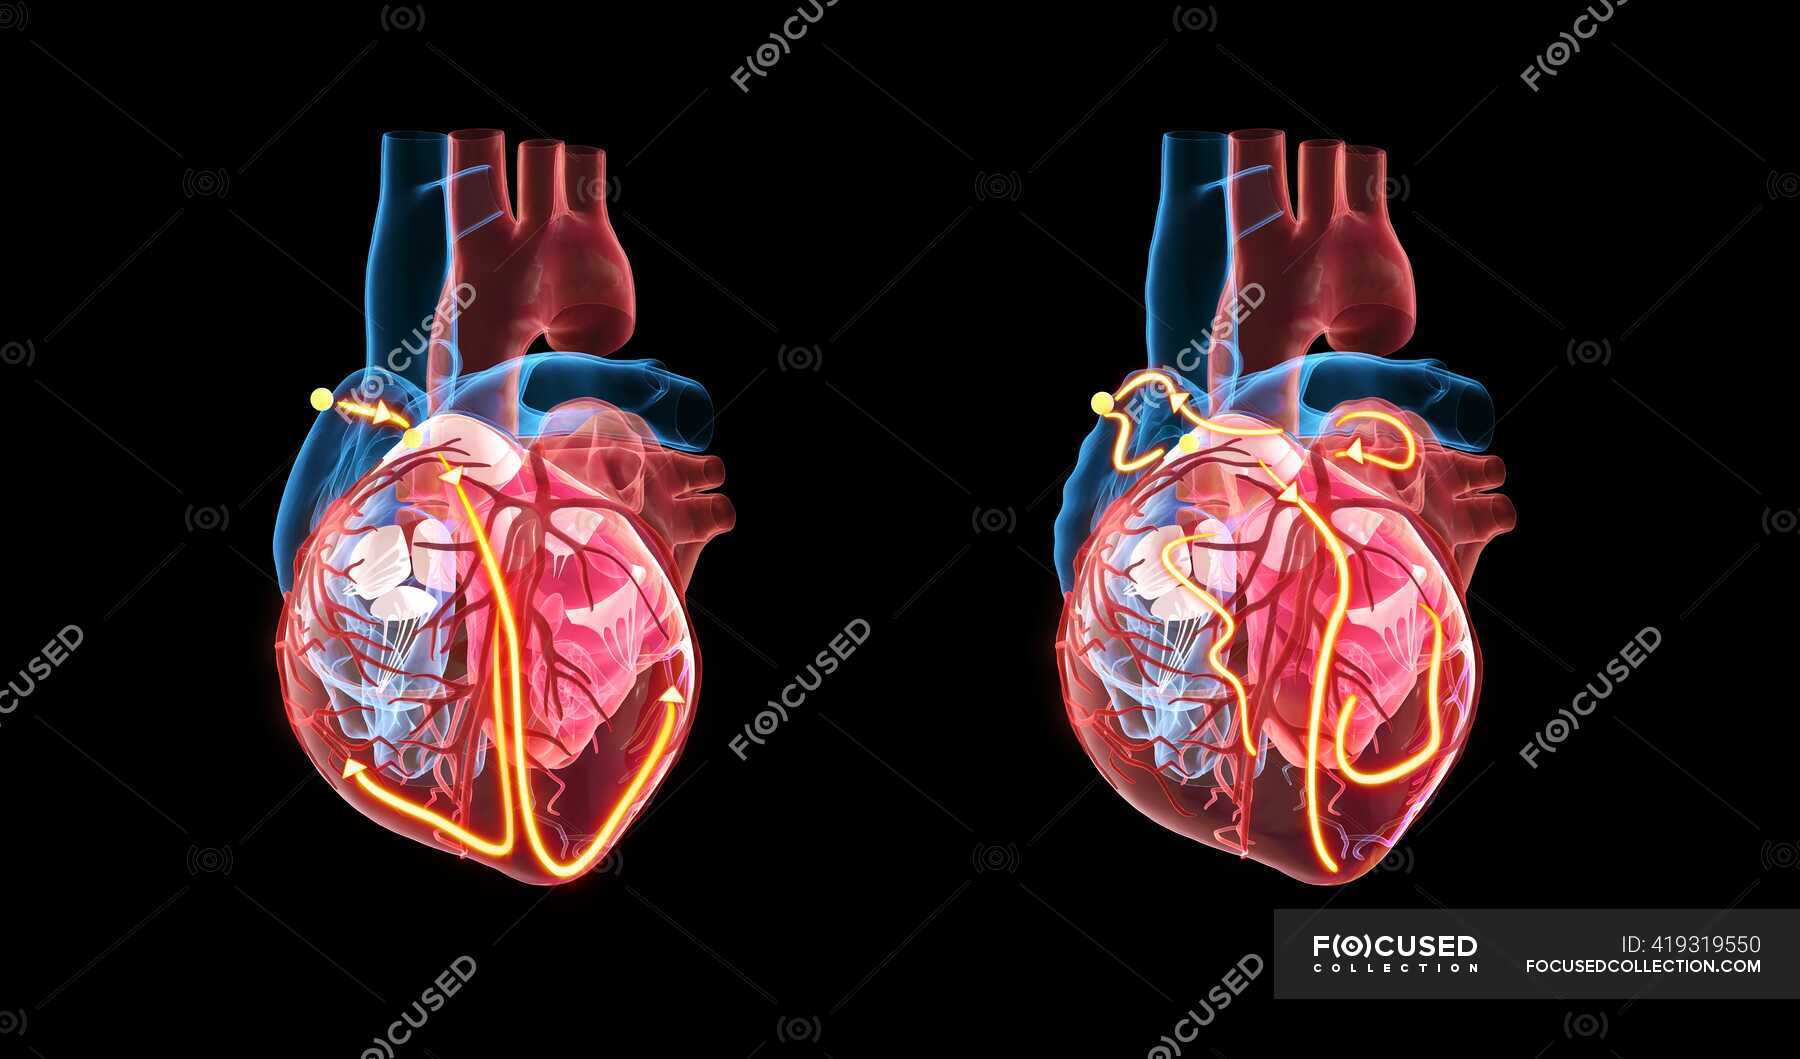 Human heart and its electrical system, 3d illustration. The yellow lines  demonstrate the electrical (conduction) system of the heart. The heart at  right shows an irregular heartbeat (arrhythmia) and atrial fibrillation. —